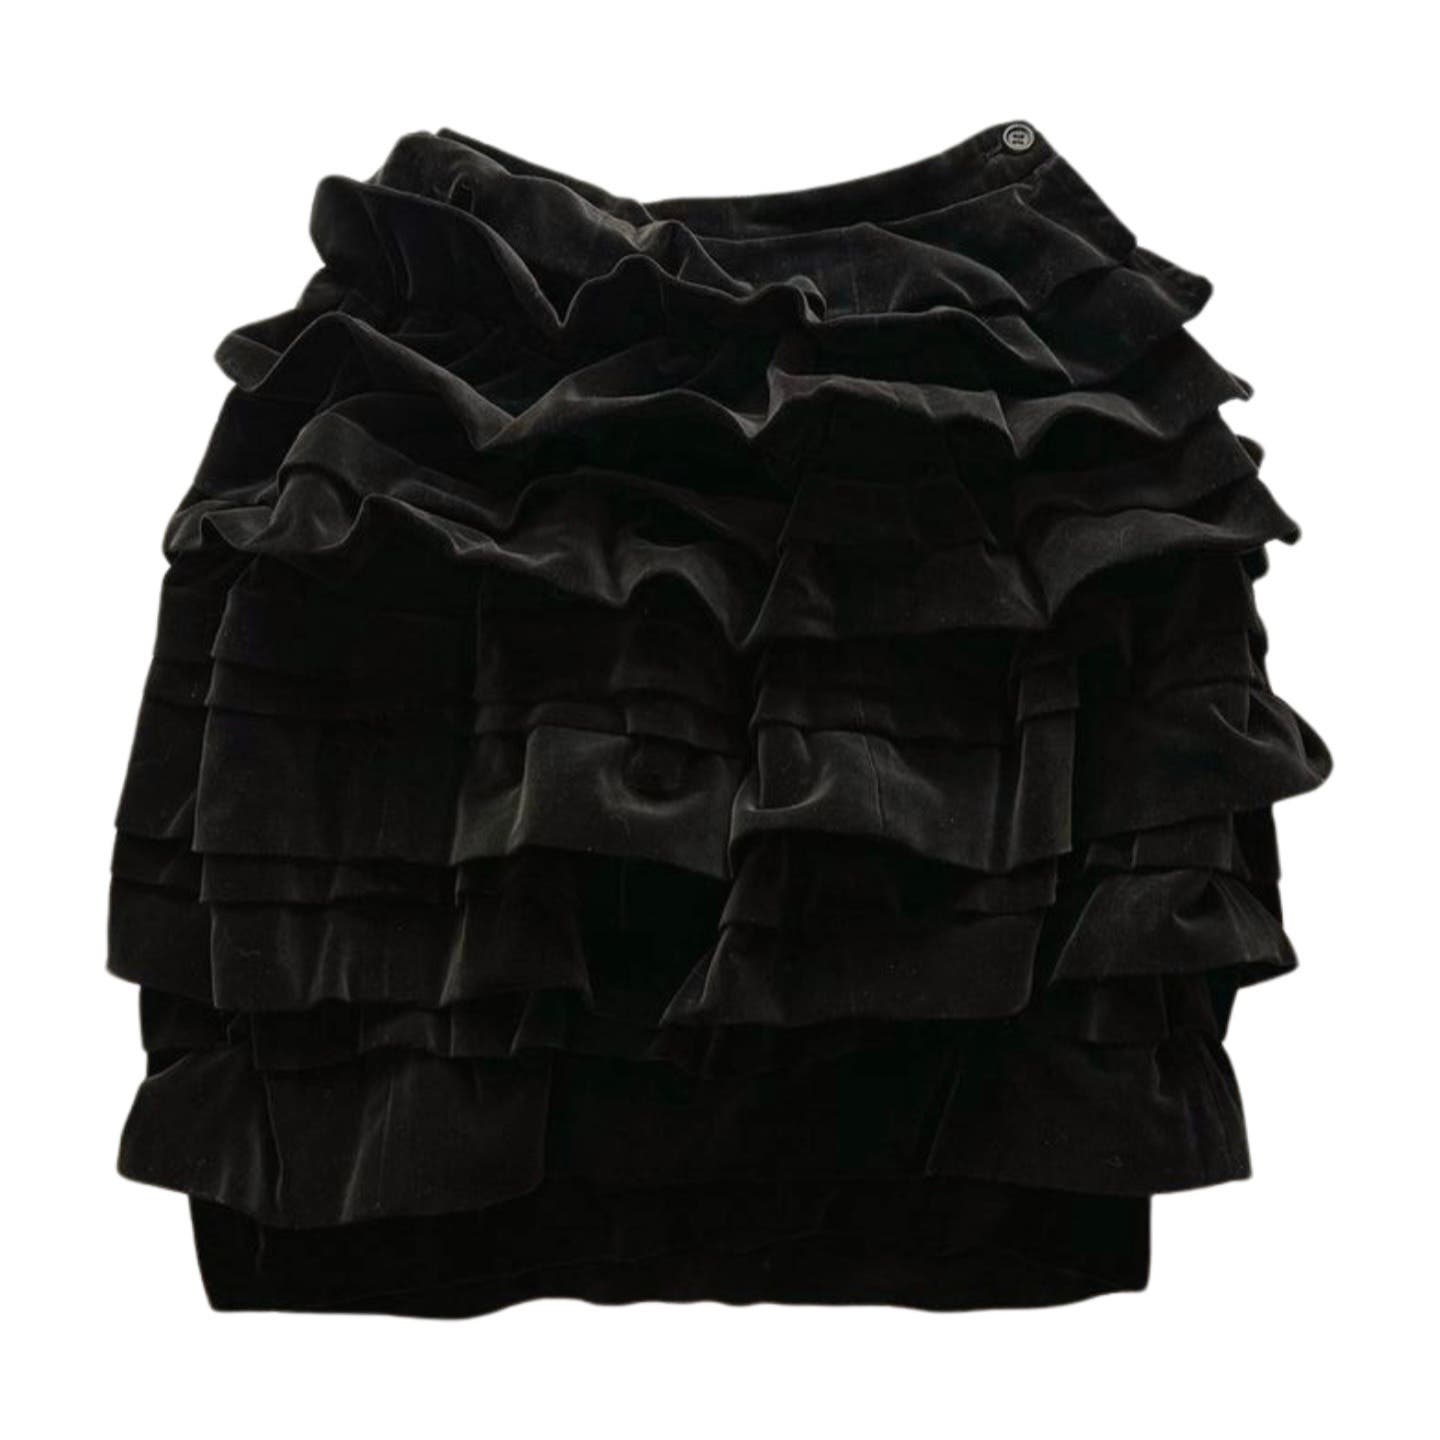 A Vintage 1990 Comme des Garcons Skirt with multiple horizontal ruffles, creating a textured, layered appearance. The Comme des Garçons skirt has an elastic waistband and a button closure at the top on the side.